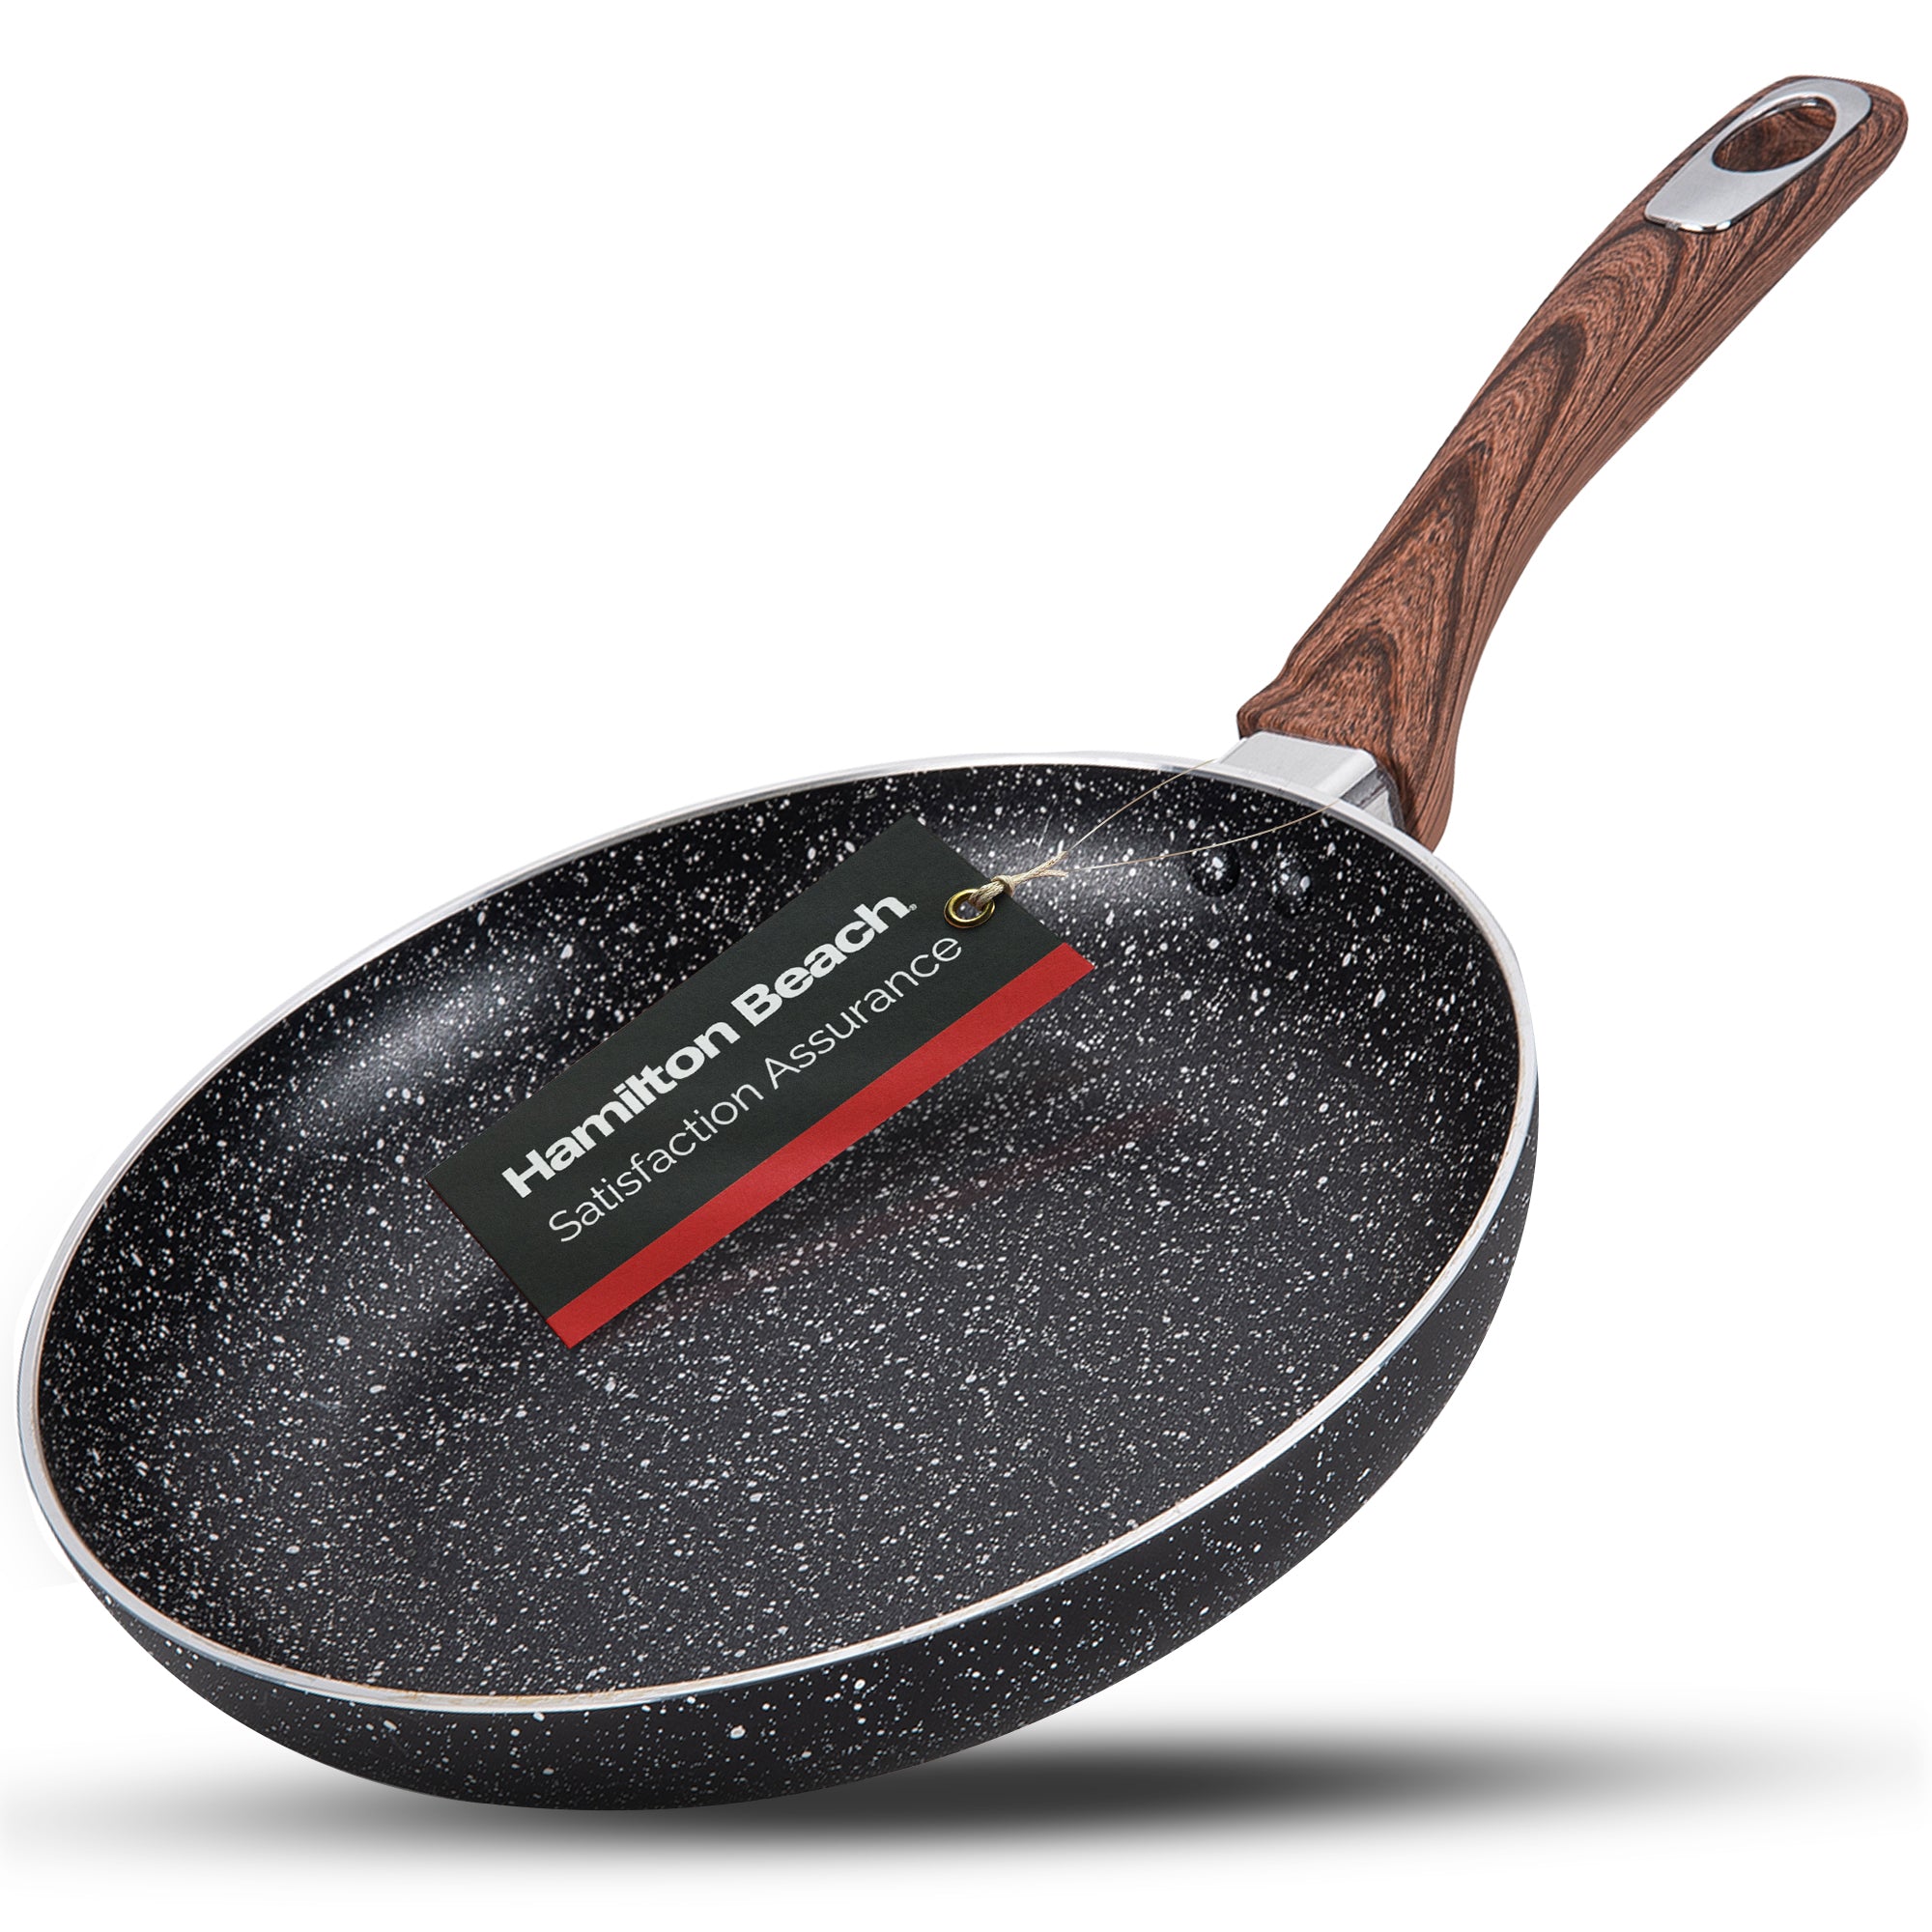 Hamilton Beach Fry Pan Aluminum 10-Inch, Nonstick with Marble Coating, Wood like Soft Touch Handle, Non-Stick Granite Fry Pan Egg Pan Omelet Pans, Stone Cookware Chef's Pan, PFOA Free Induction Bottom